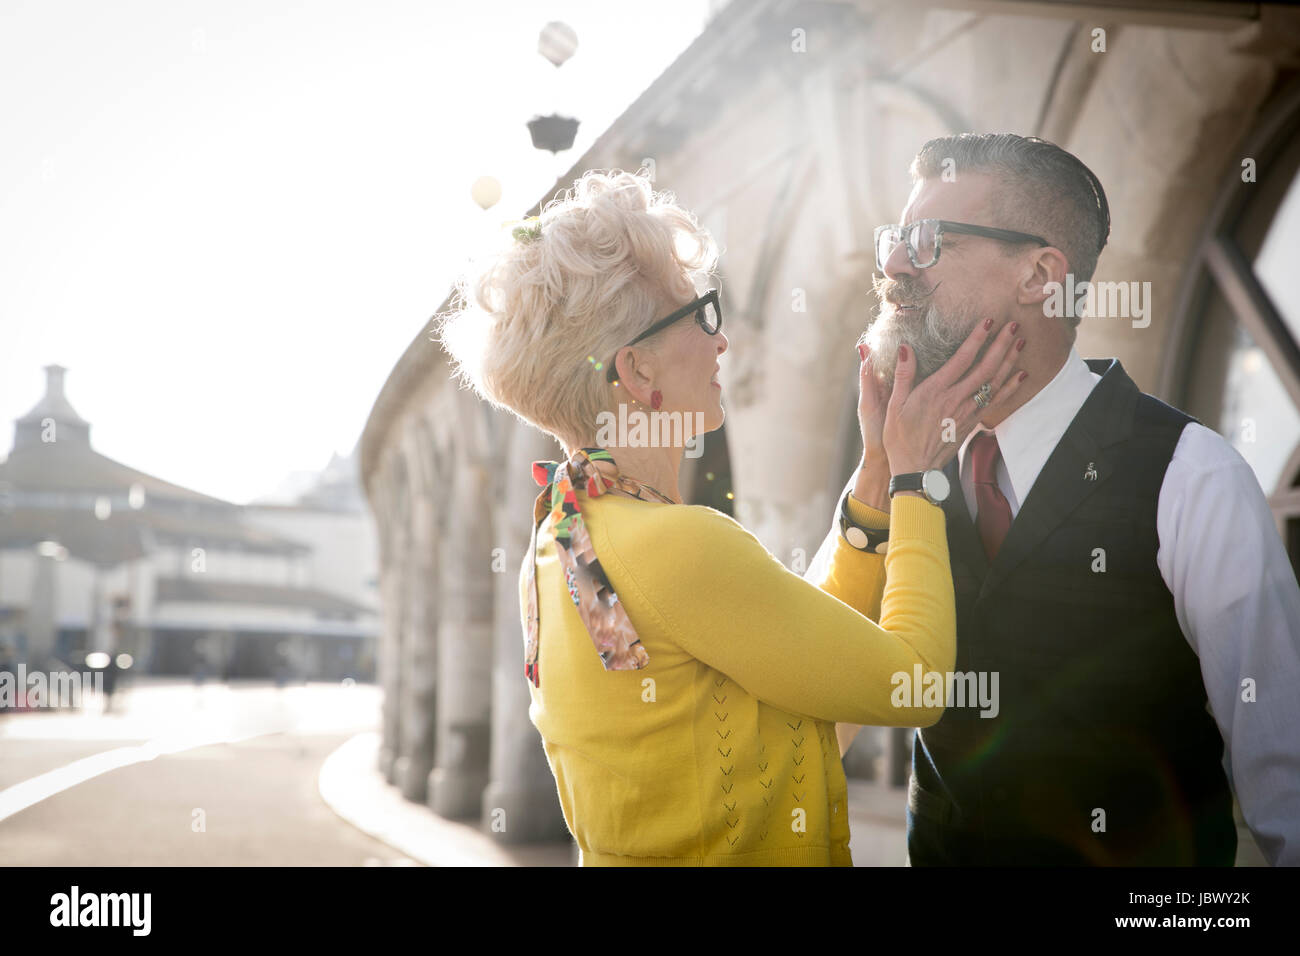 Style années 50 vintage woman cupping boyfriend's chin at coast Banque D'Images